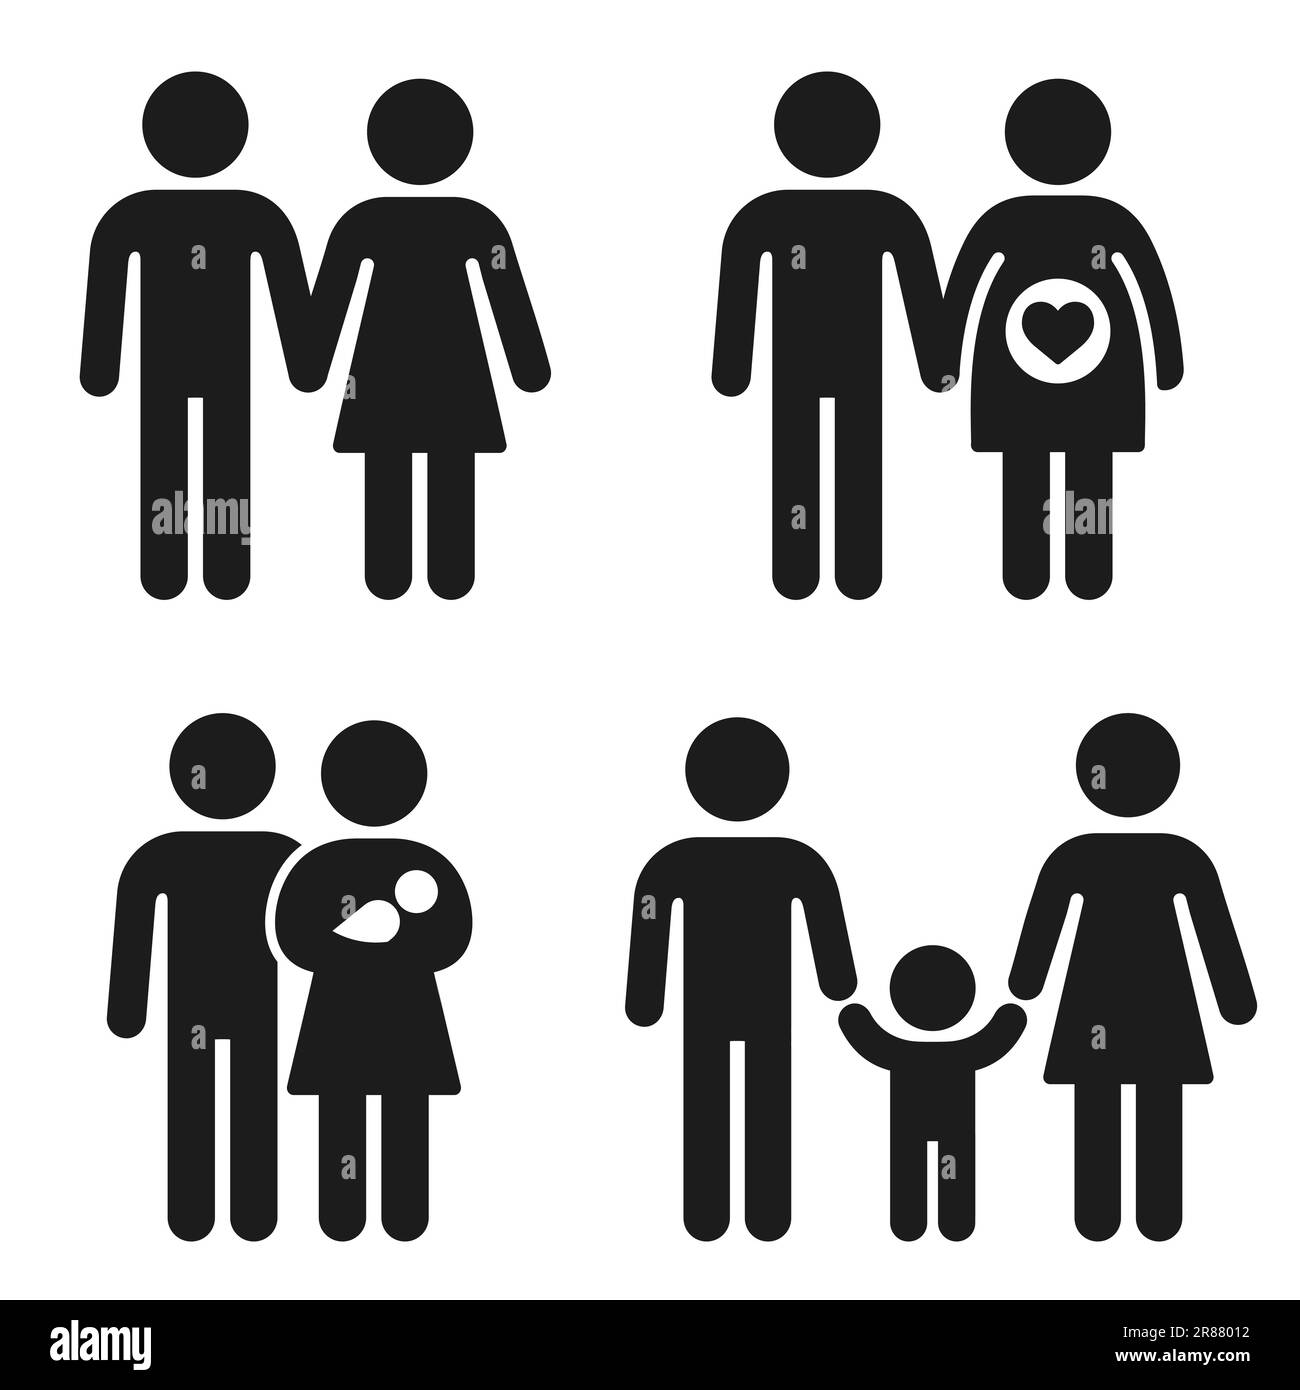 Couple pregnancy, childbirth and parenthood icon set. Man and woman with baby and toddler. Simple people figure icons, vector symbols. Stock Vector